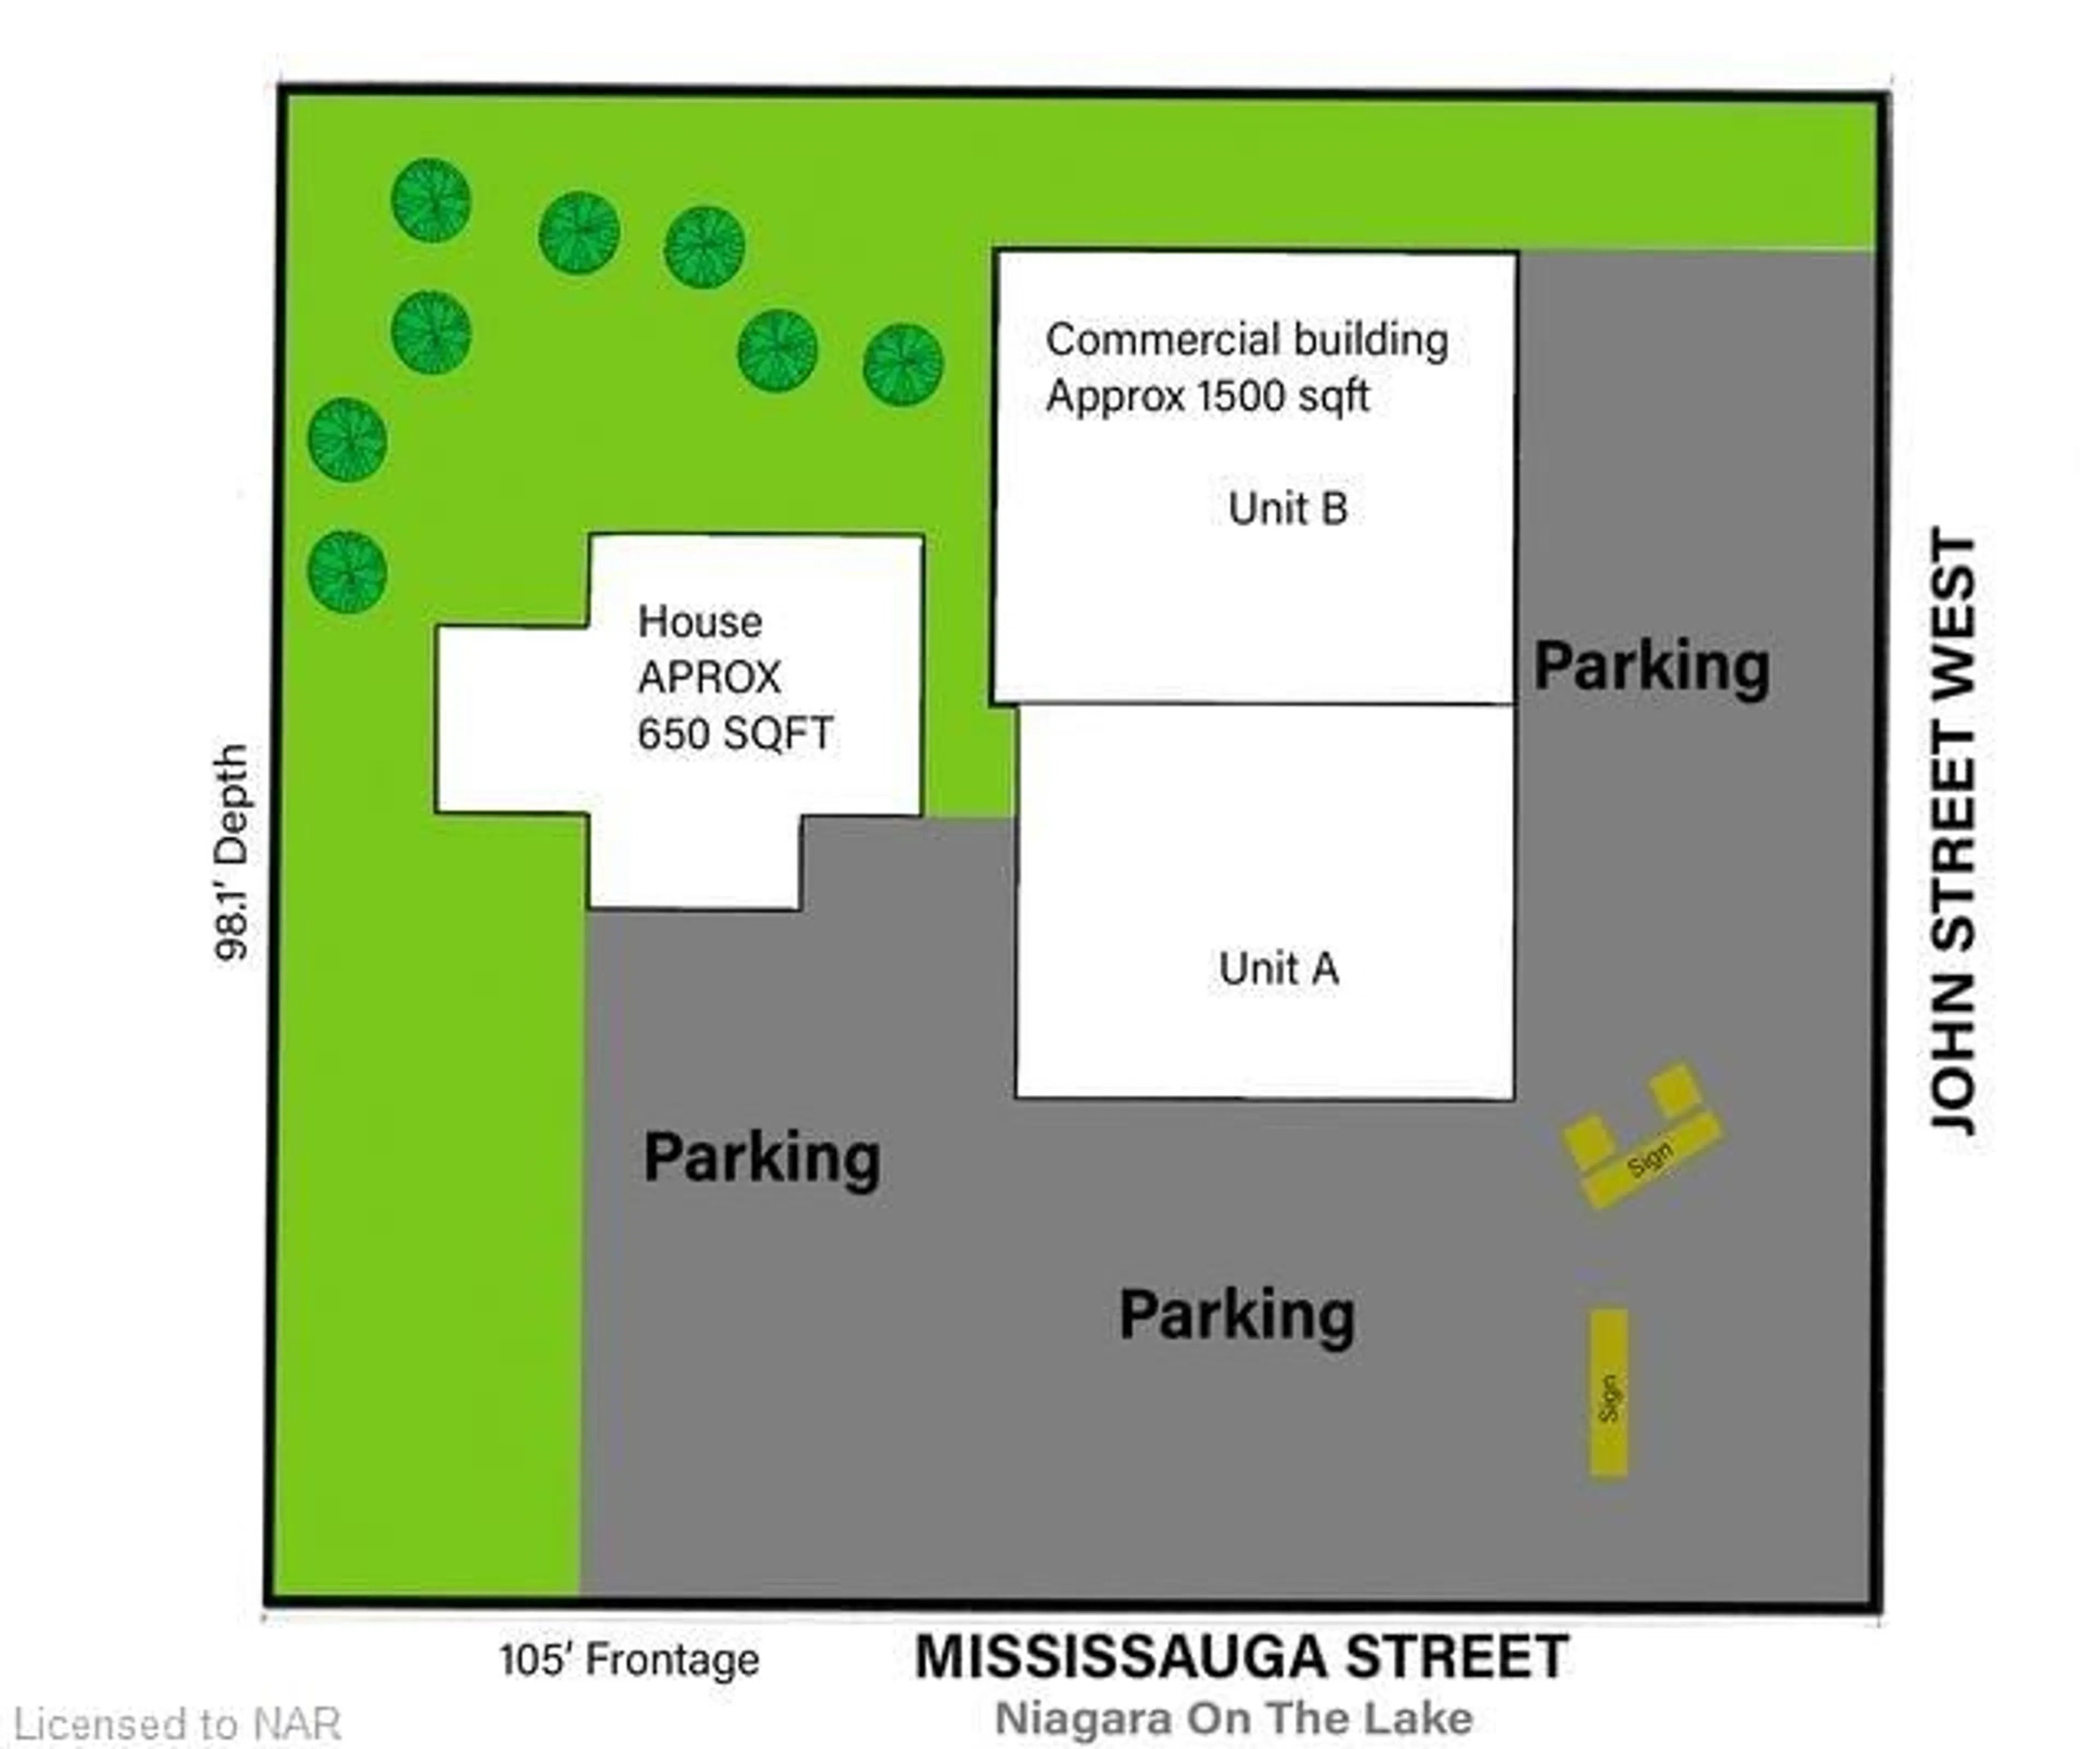 Parking for 494 Mississagua St, Niagara-on-the-Lake Ontario L0S 1J0